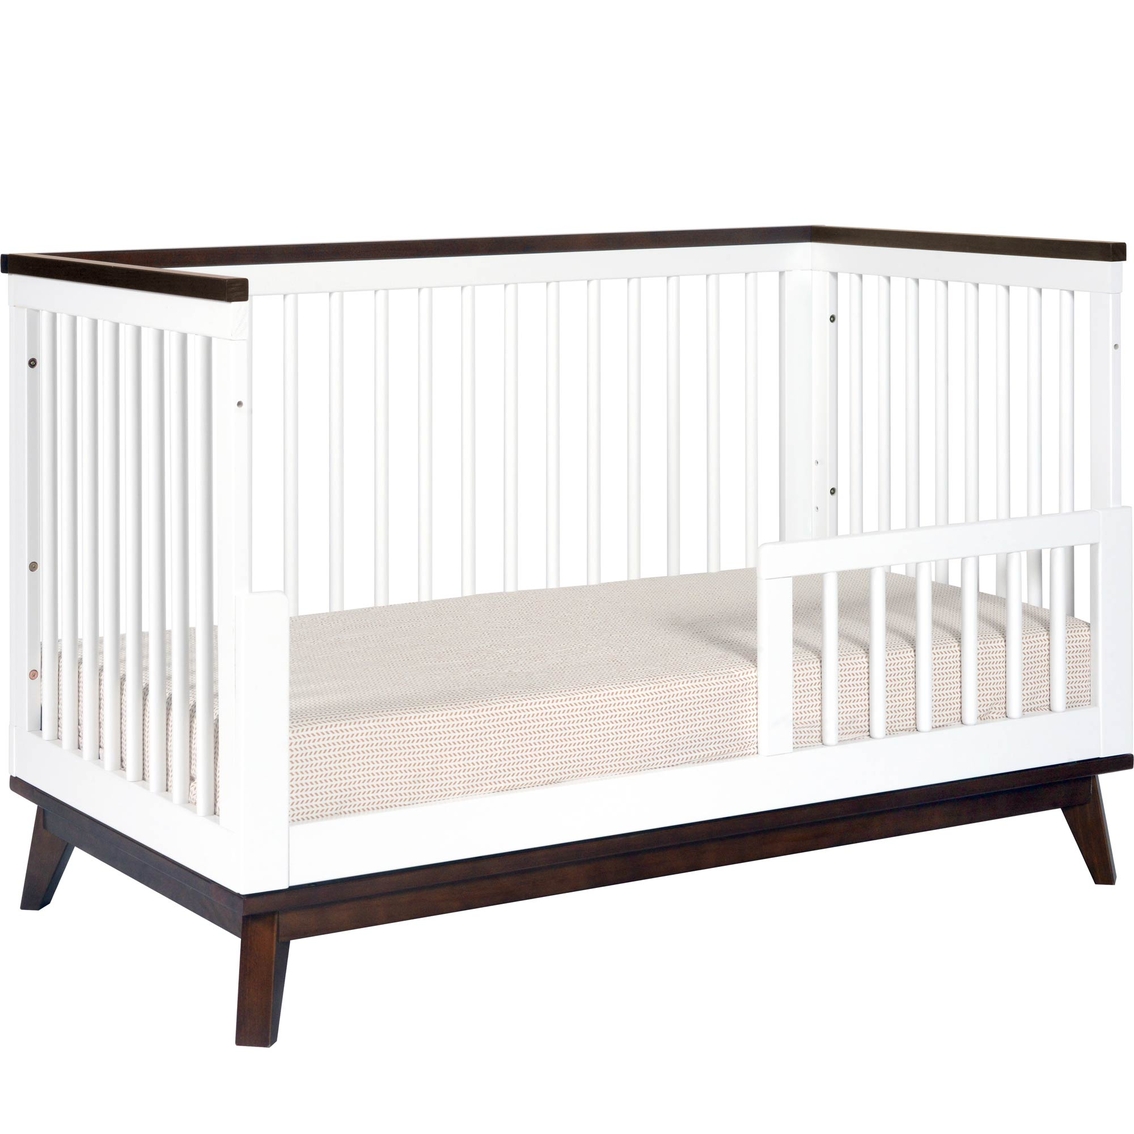 Babyletto Scoot 3 in 1 Convertible Crib - Image 2 of 3